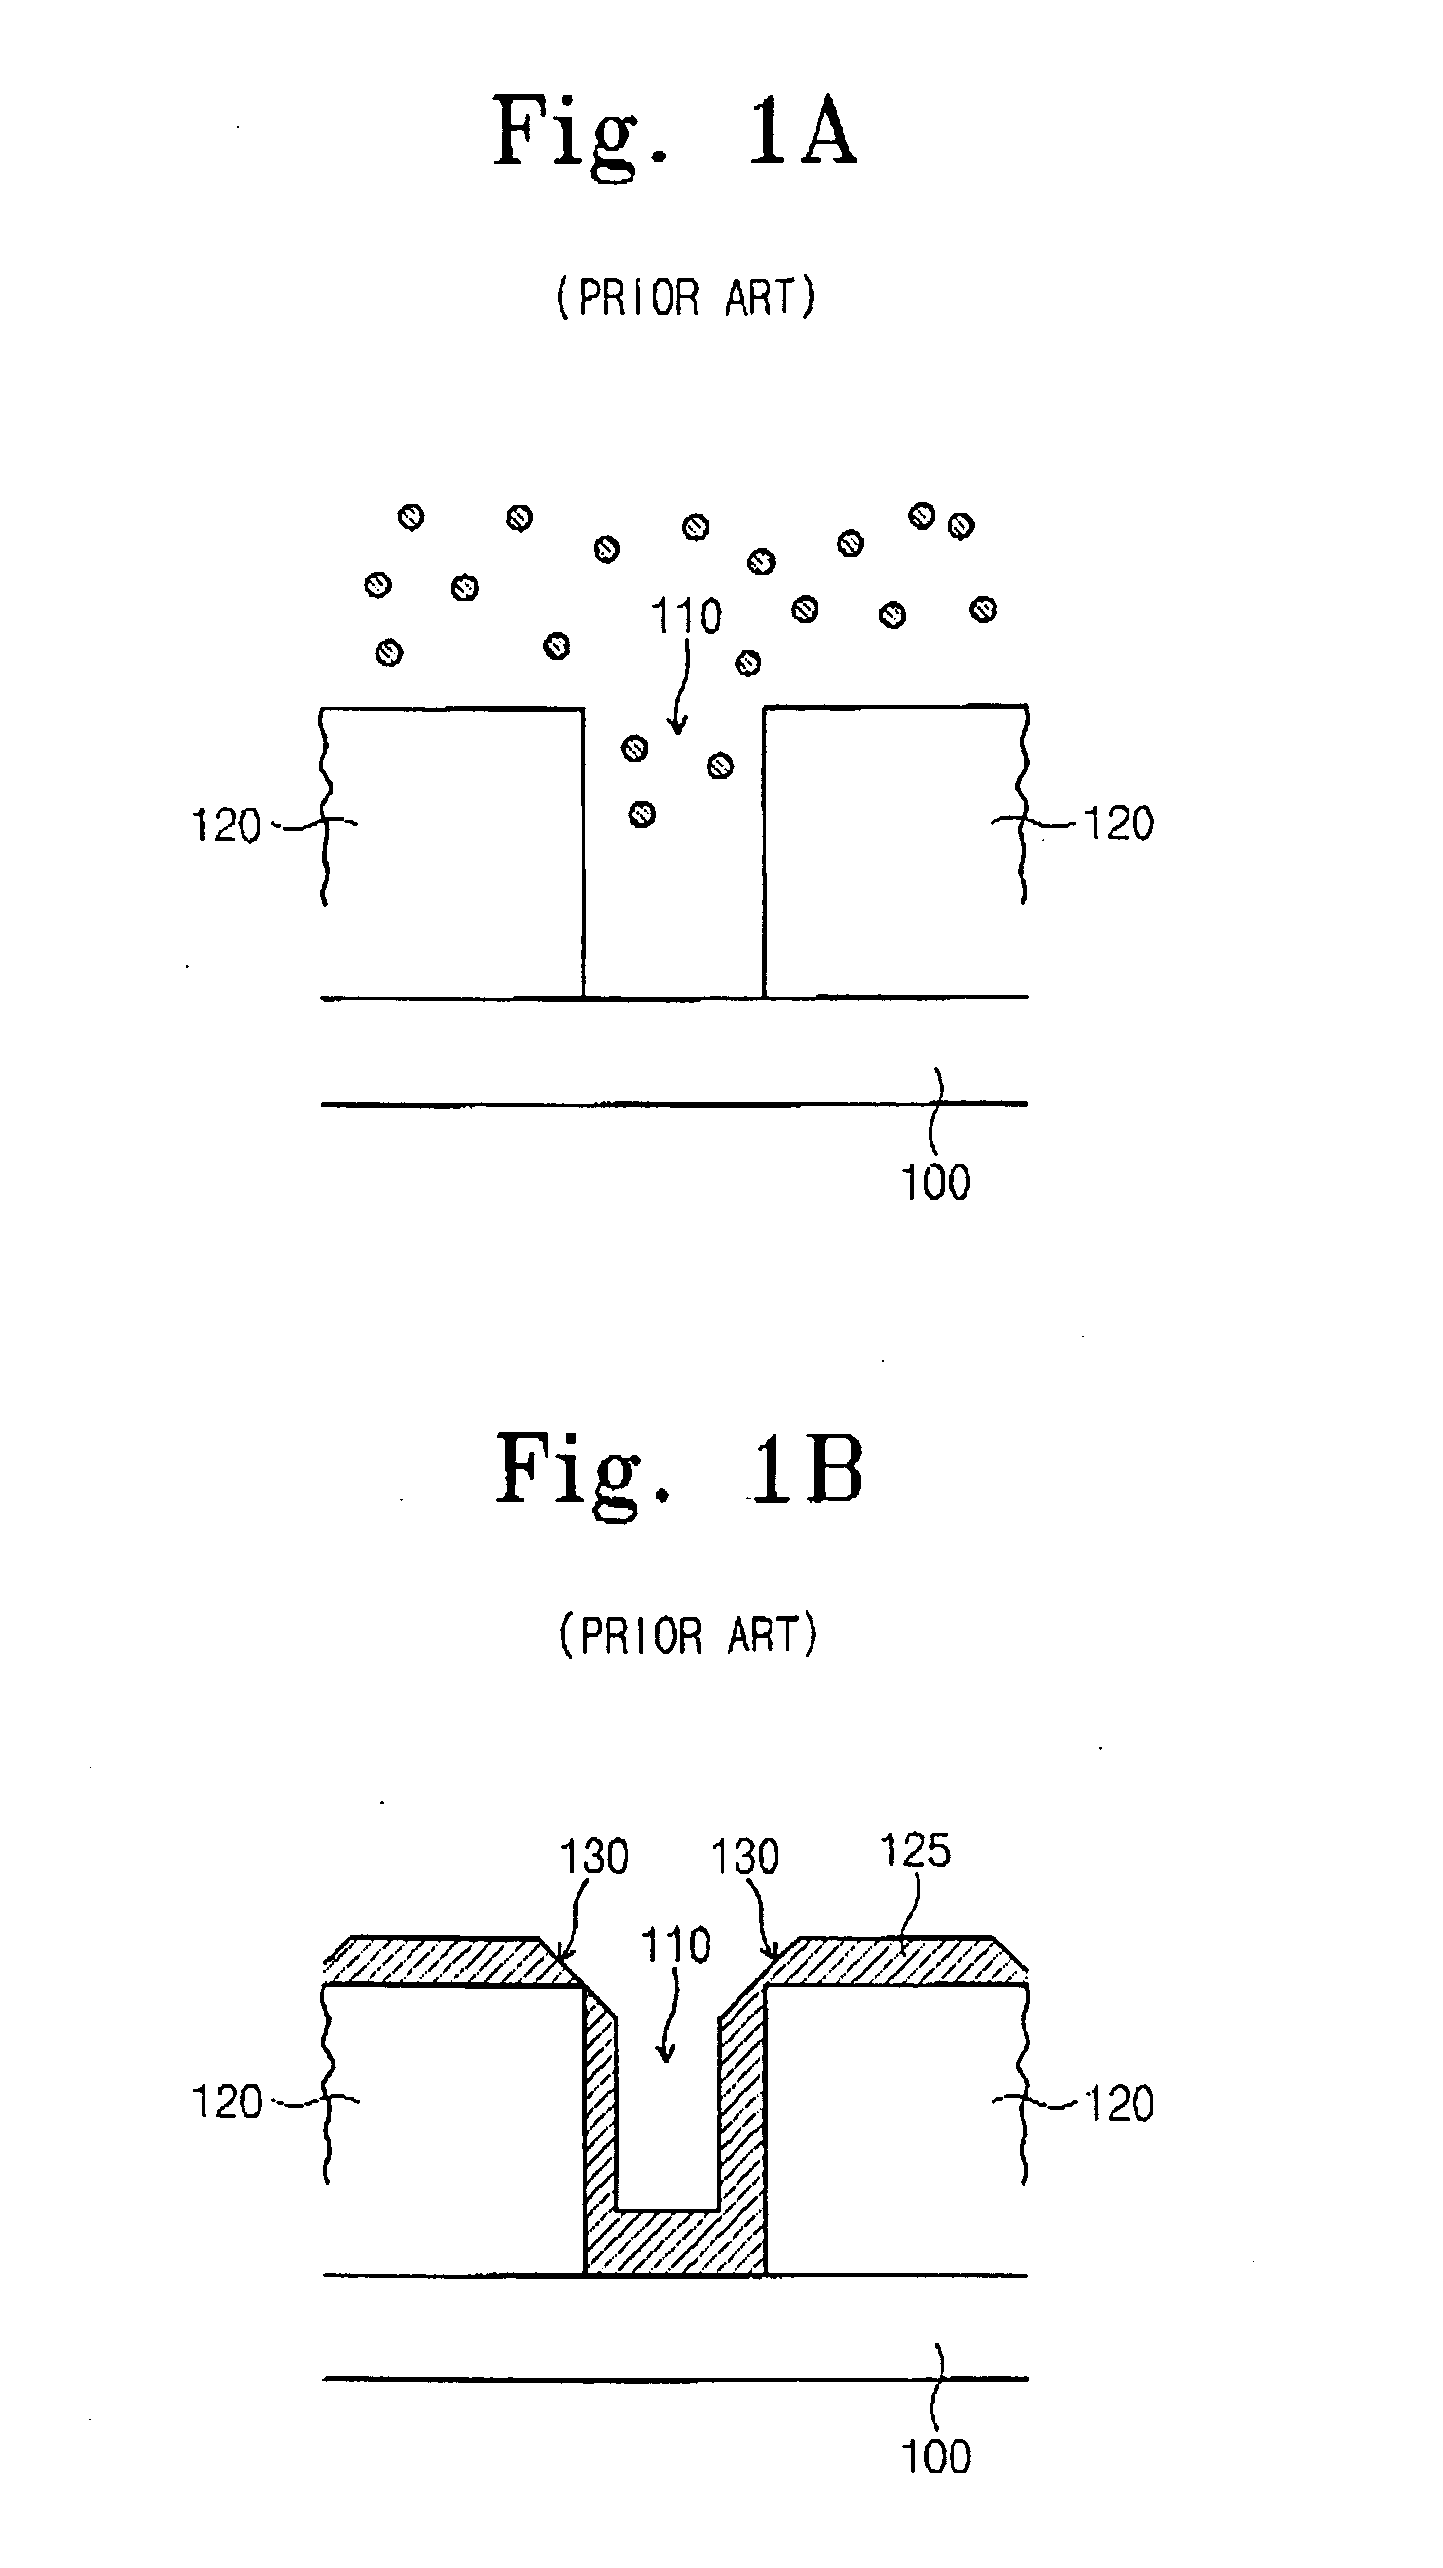 Methods of filling trenches using high-density plasma deposition (HDP)